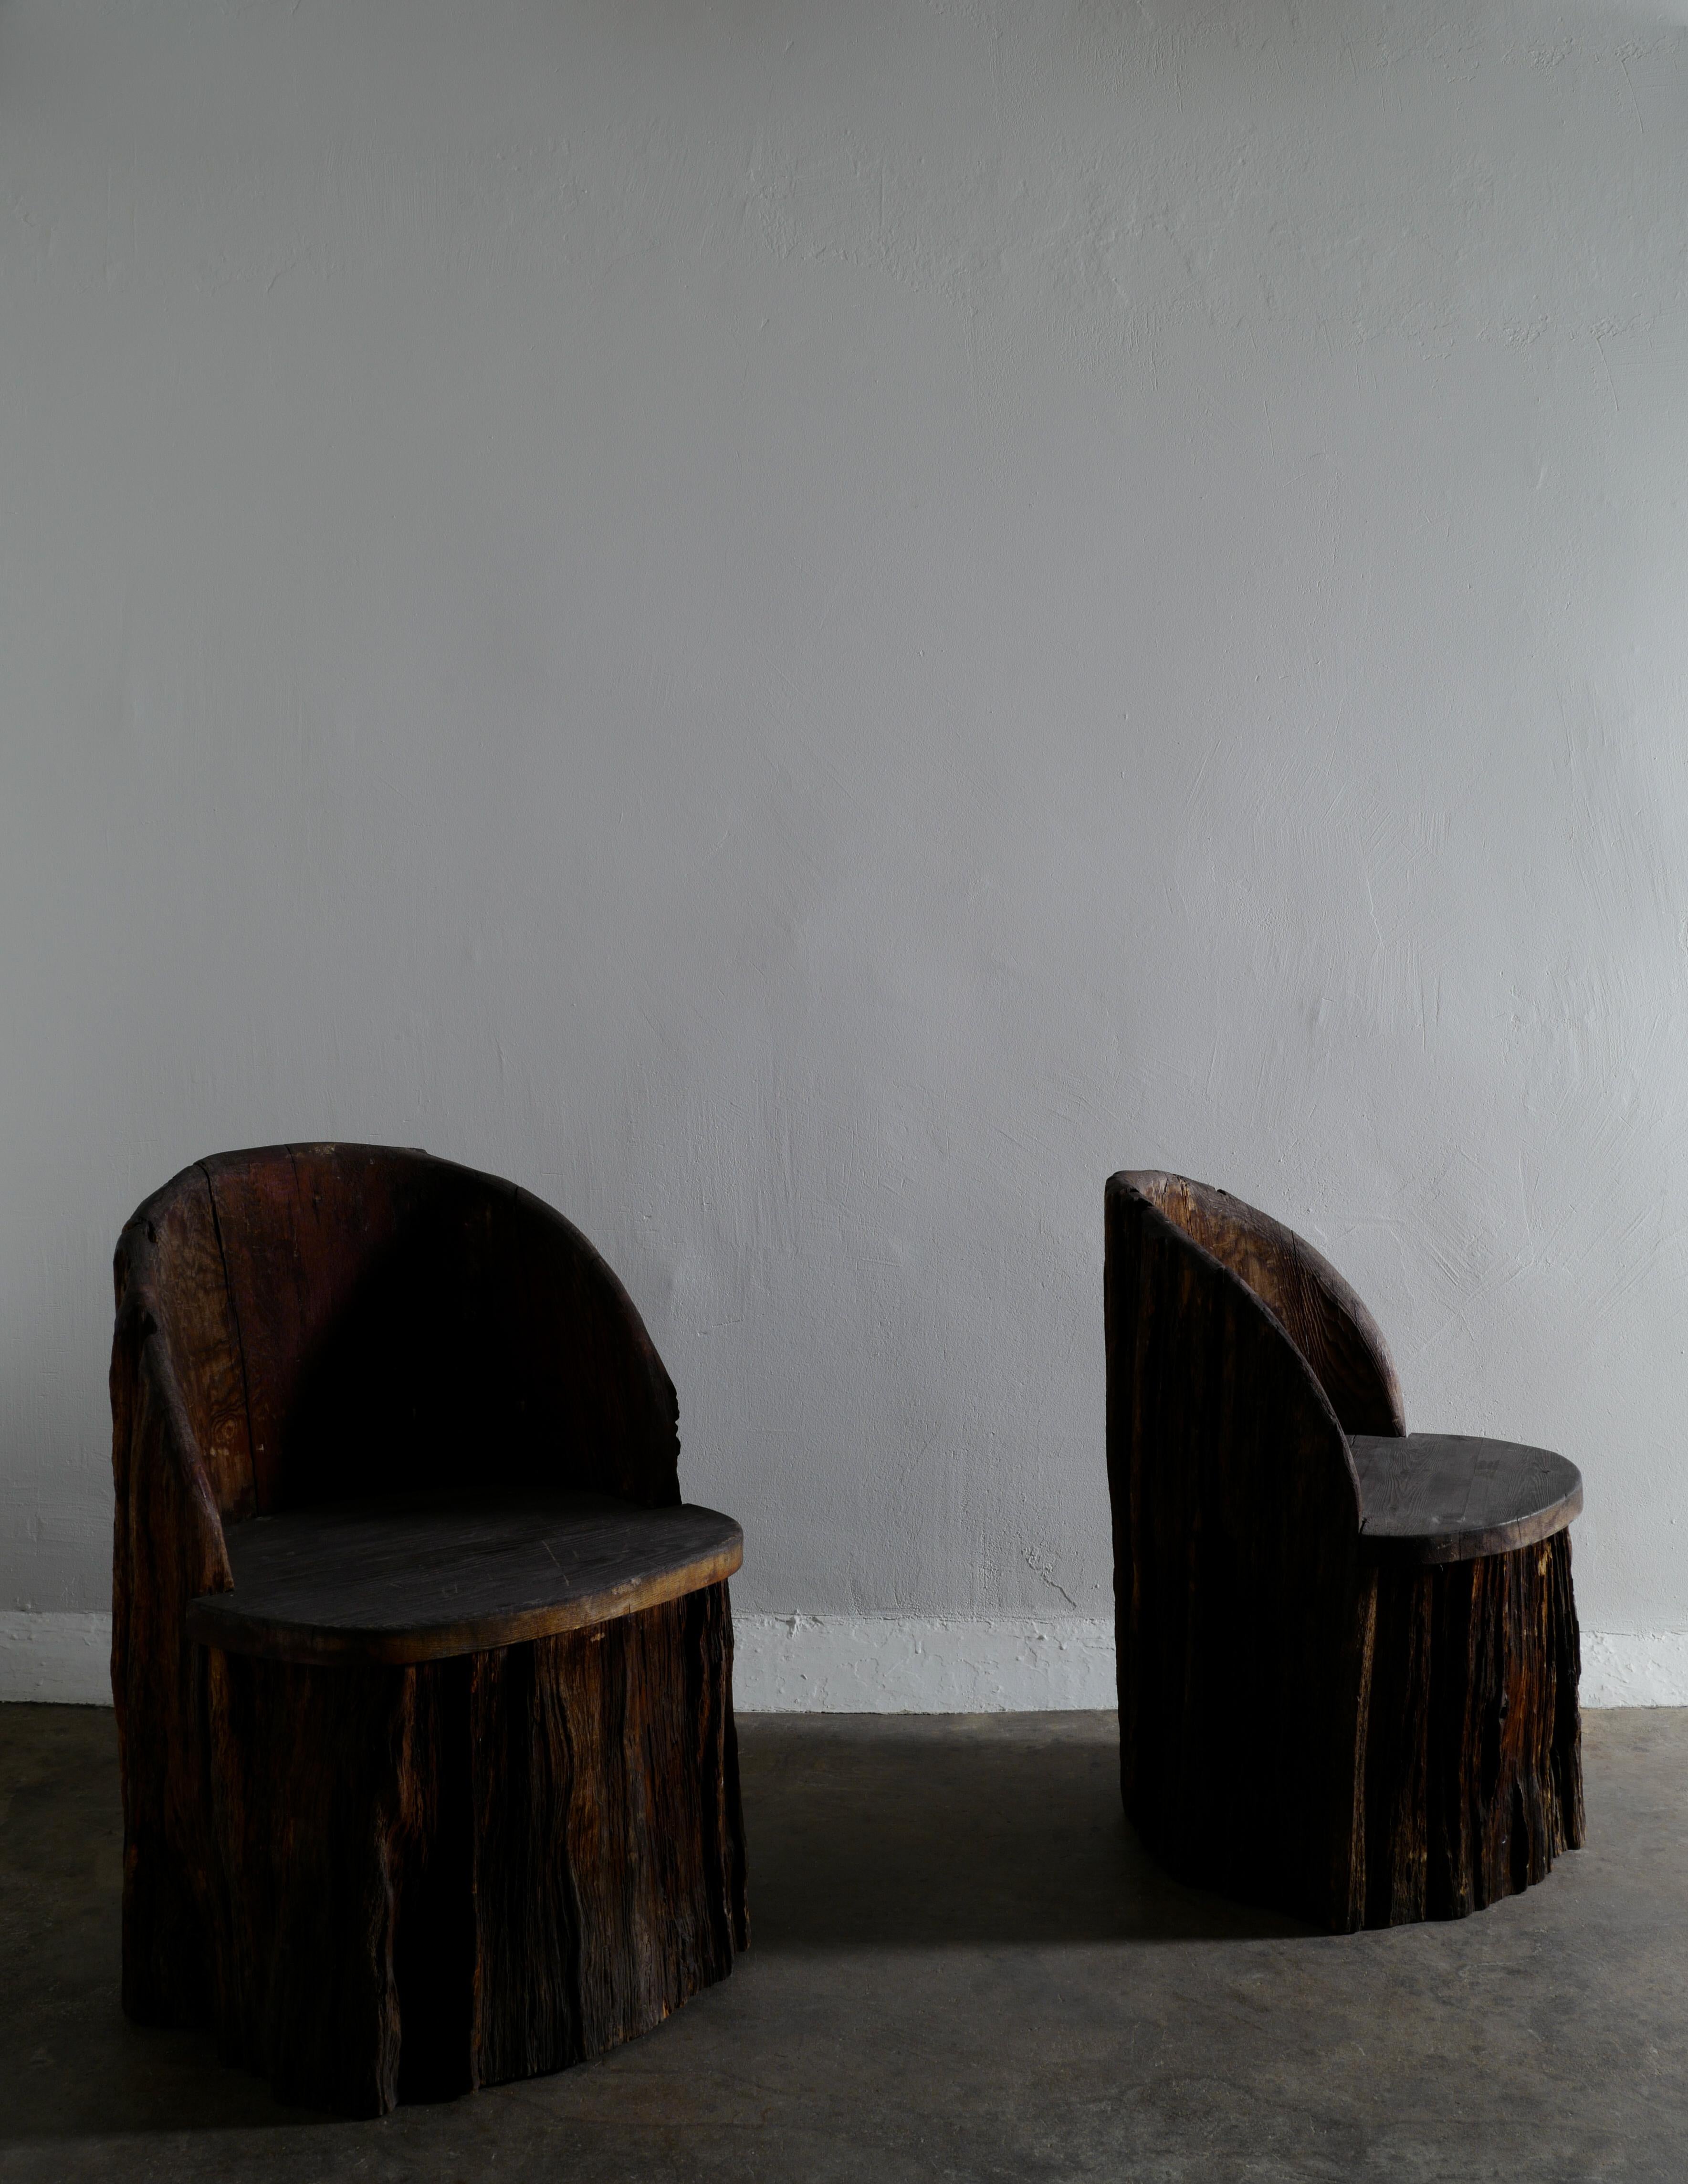 20th Century Swedish Primitive Sculptural Wabi Sabi Stump Chairs in Solid Stained Pine, 1900s